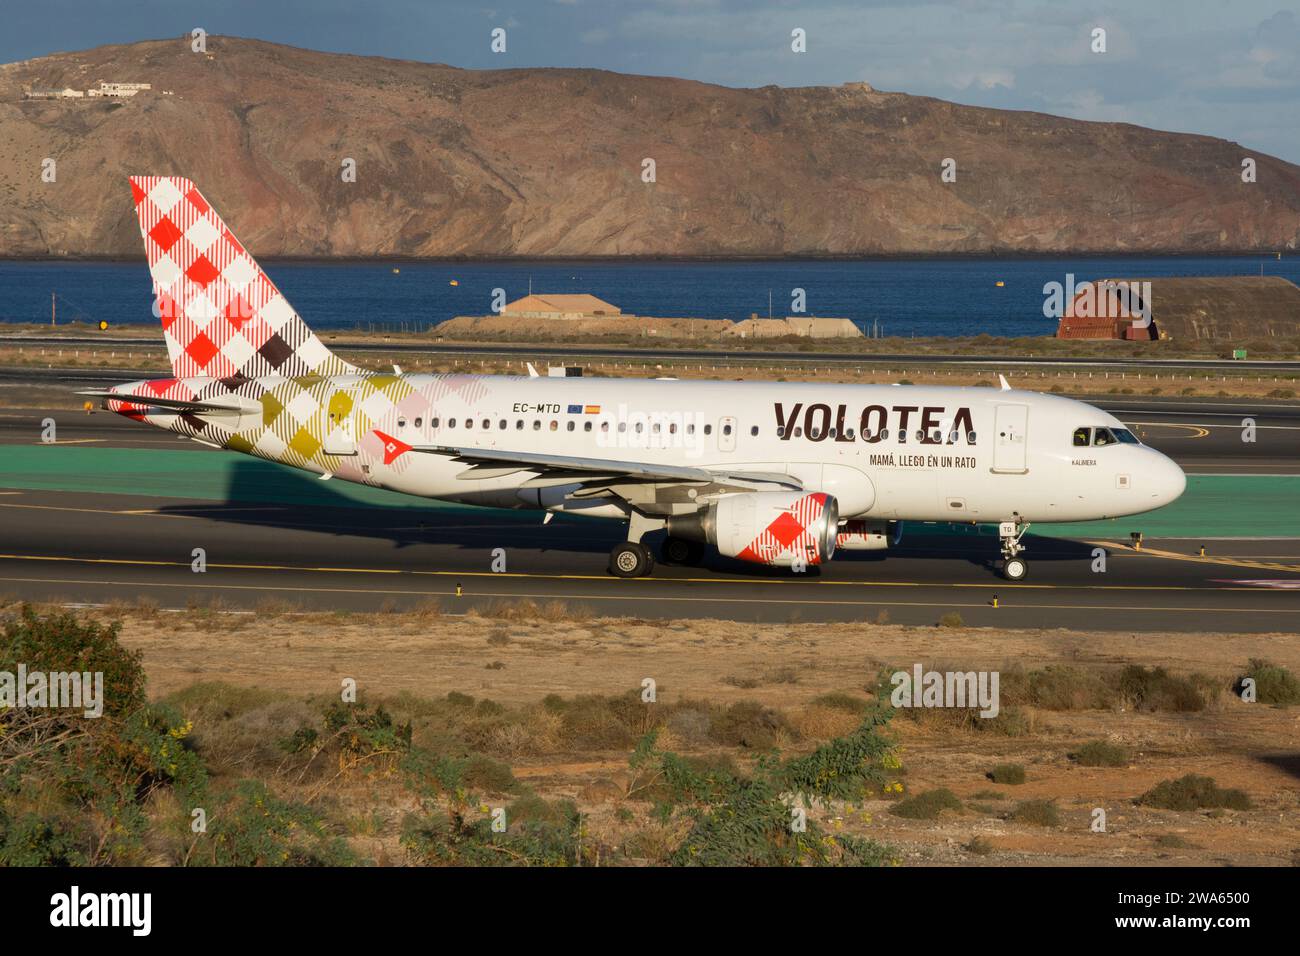 Airbus A319 airliner of the Volotea airline at the Gran Canaria airport Stock Photo